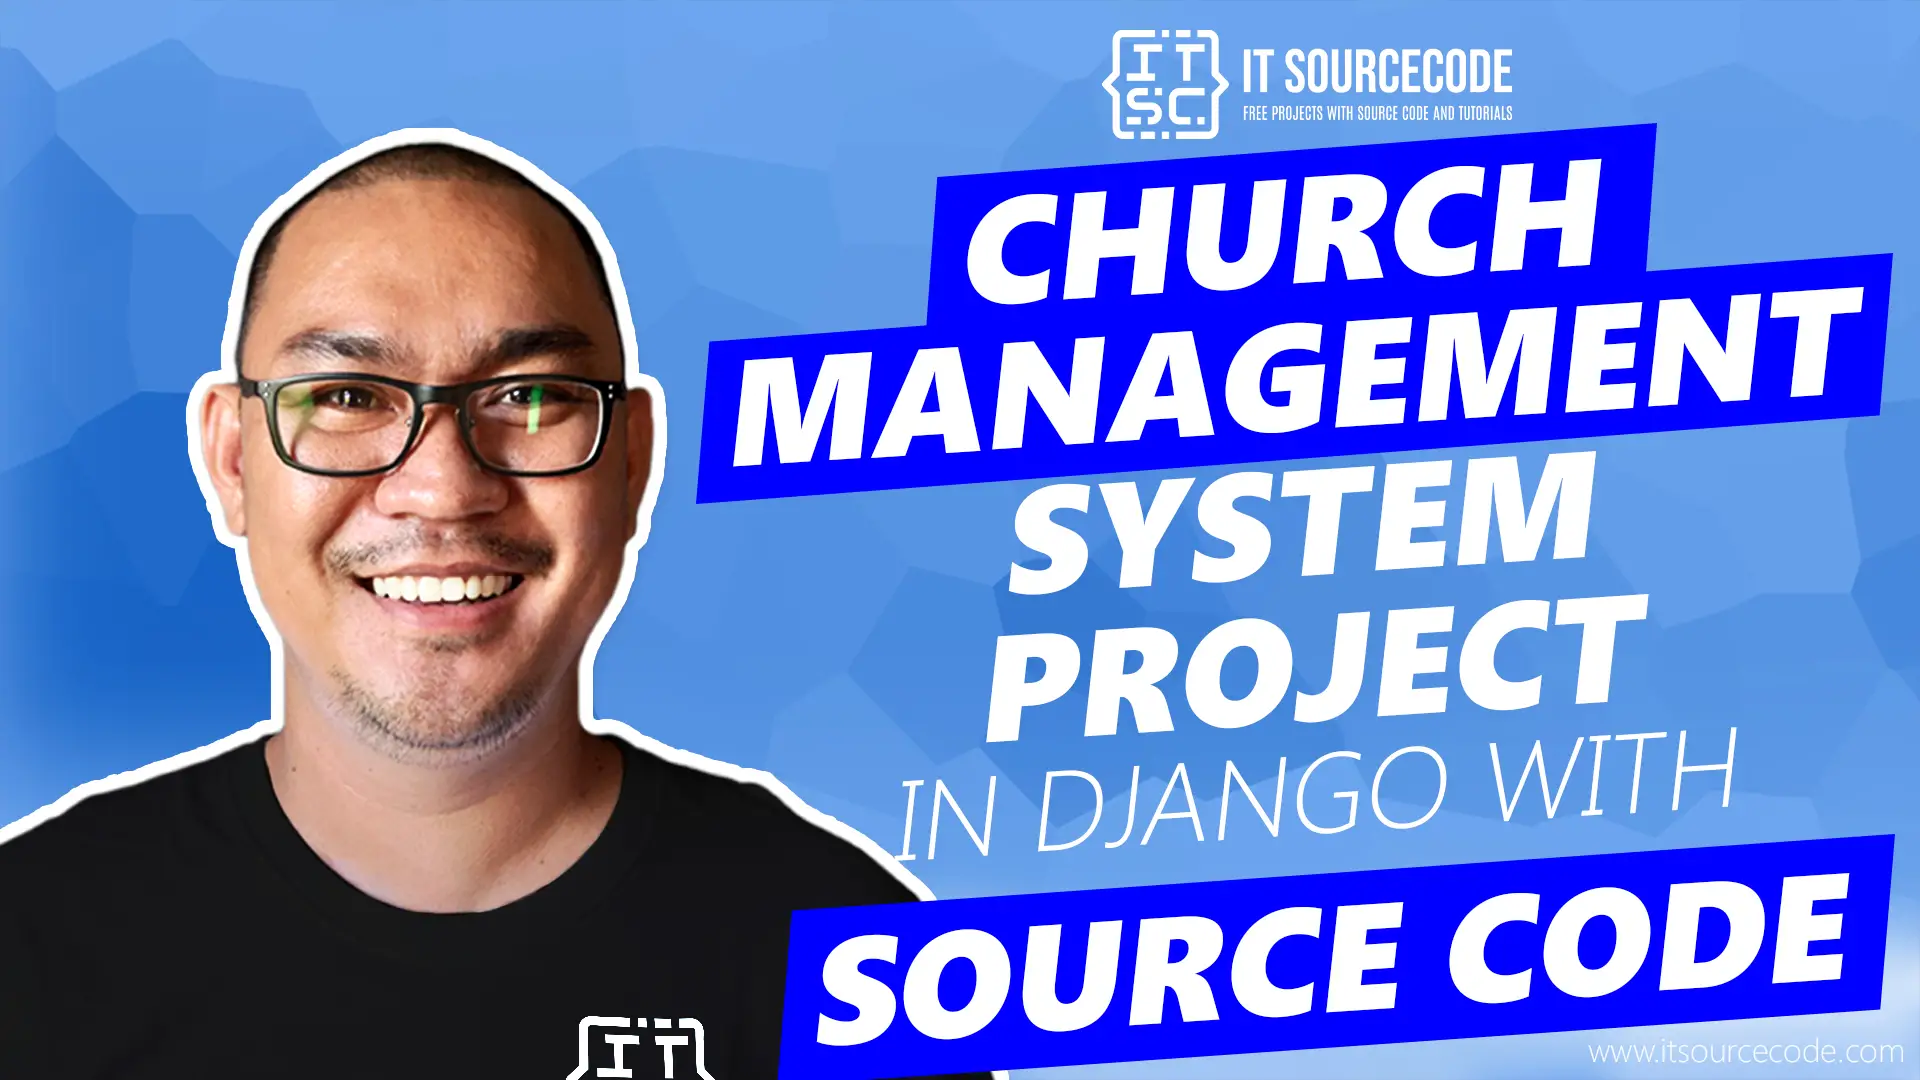 Church Management System Project in Django with Source Code